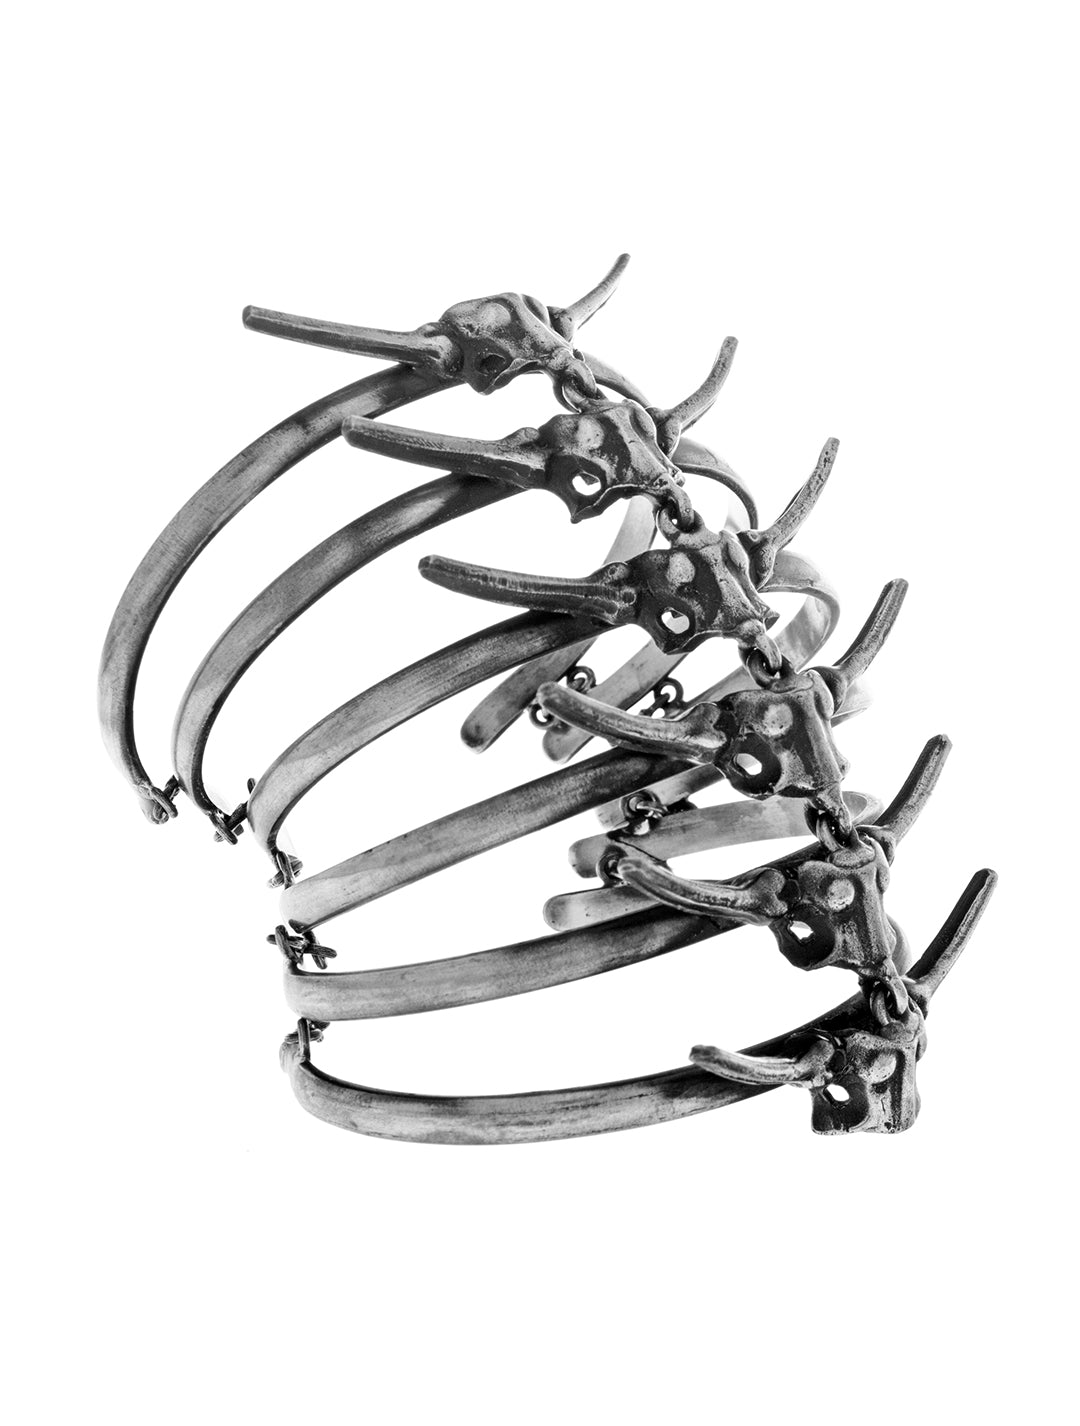 The Centipede Cuff Bracelet by Costume Therapy - Psylo Fashion